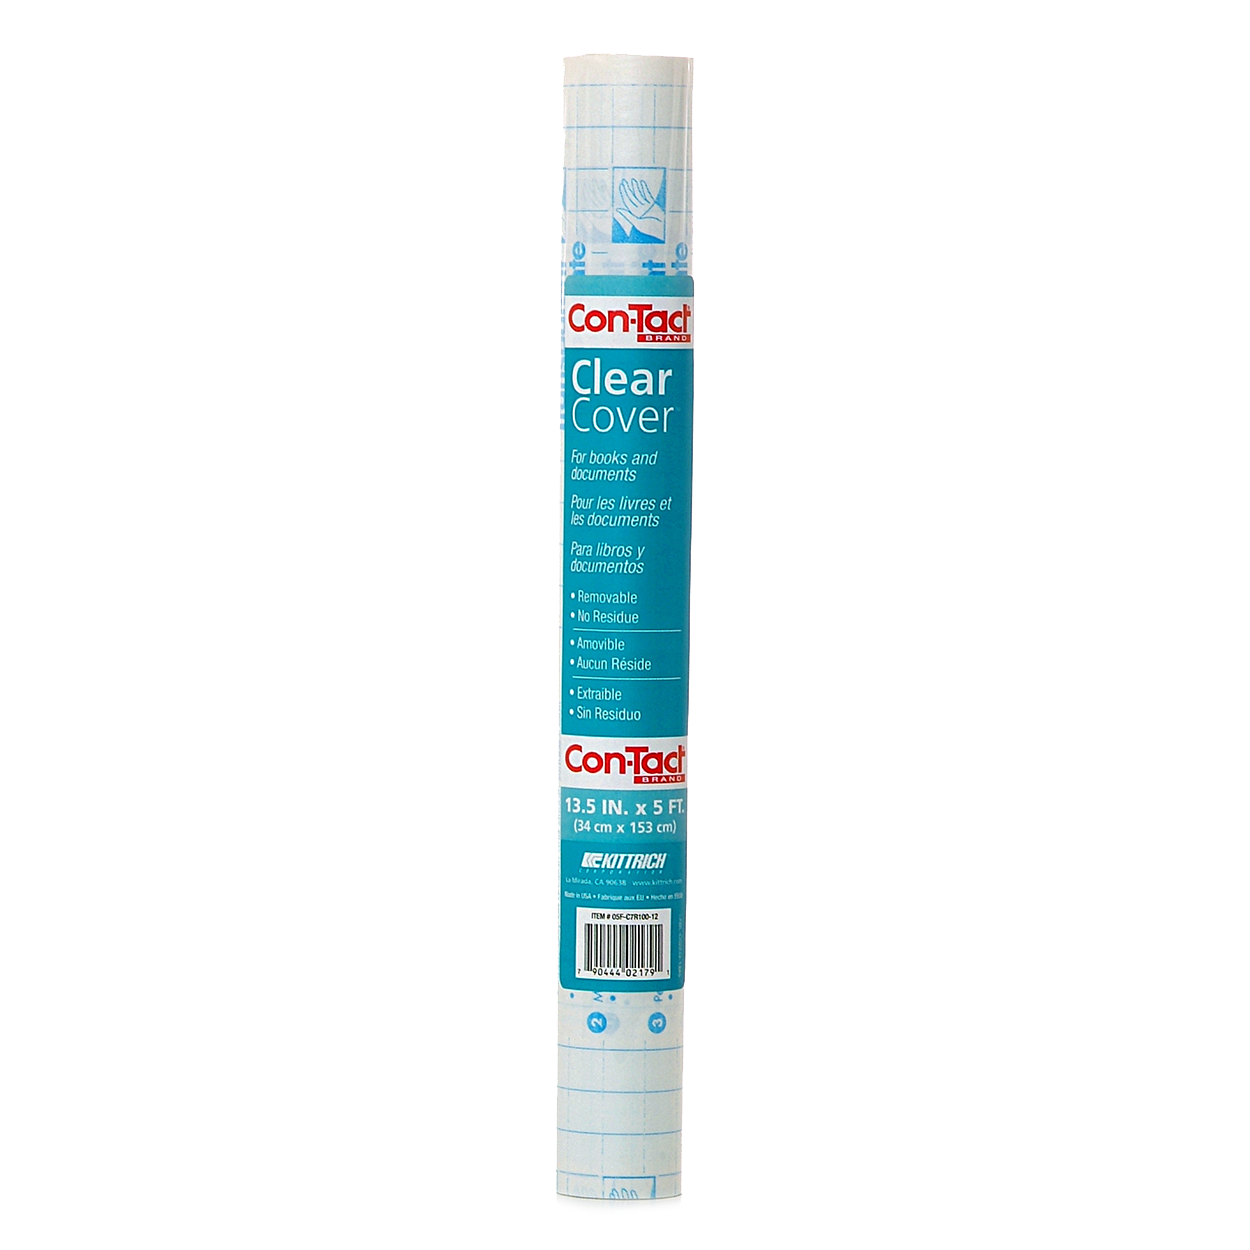 13.5” x 5 ft Con-Tact® Brand Clear Adhesive Roll